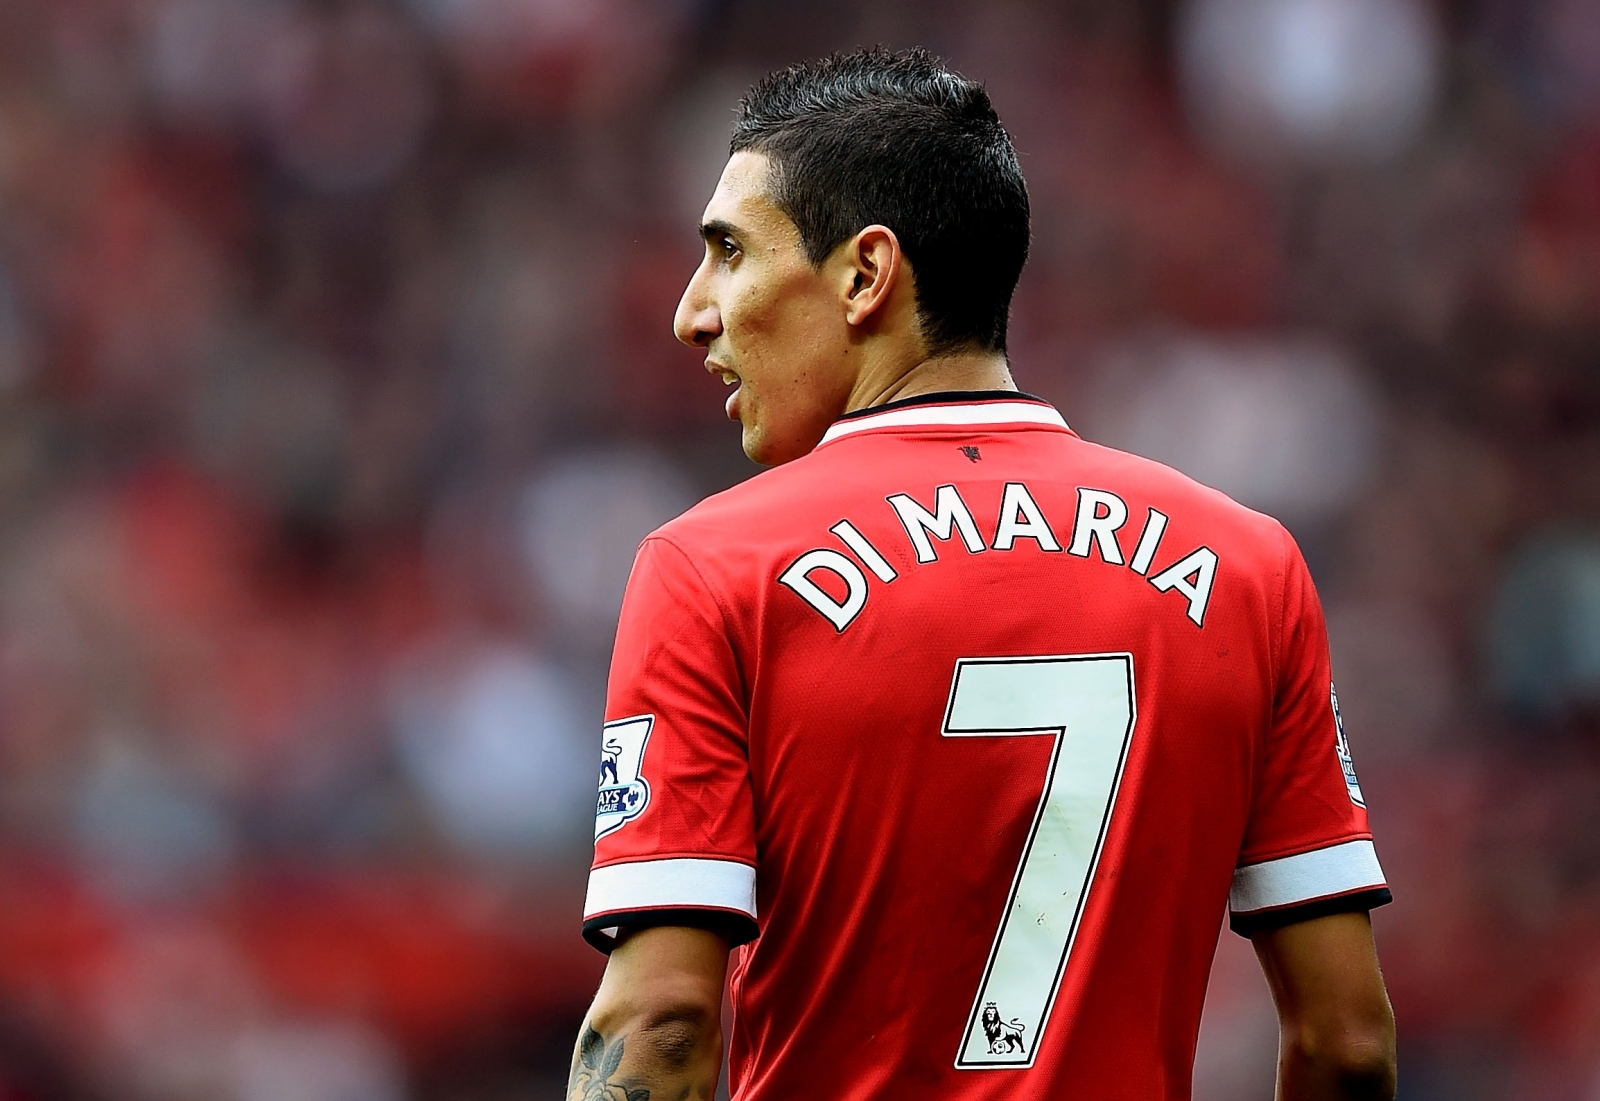 Angel di Maria at Manchester United: Where did it all go wrong?